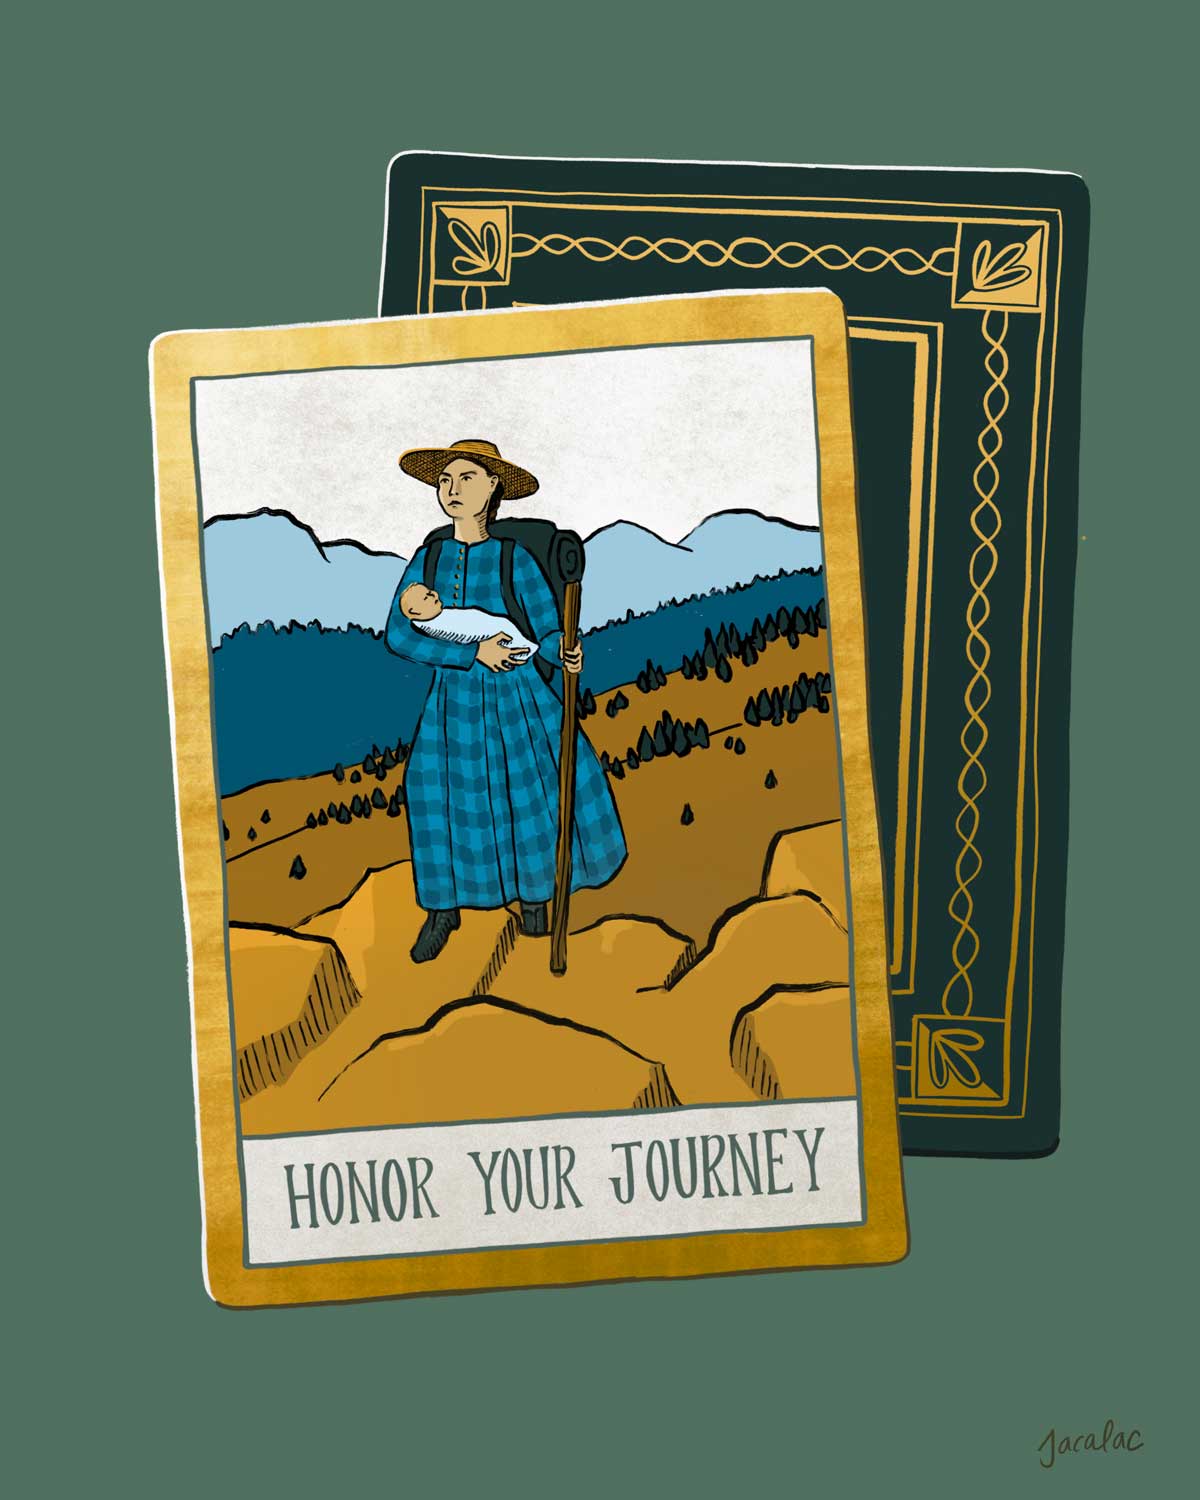 An illustrated mockup of an oracle card with a drawing of a woman in the 1800s wearing a plaid dress and carrying a baby while hiking in the mountains. The card reads, "Honor Your Journey."